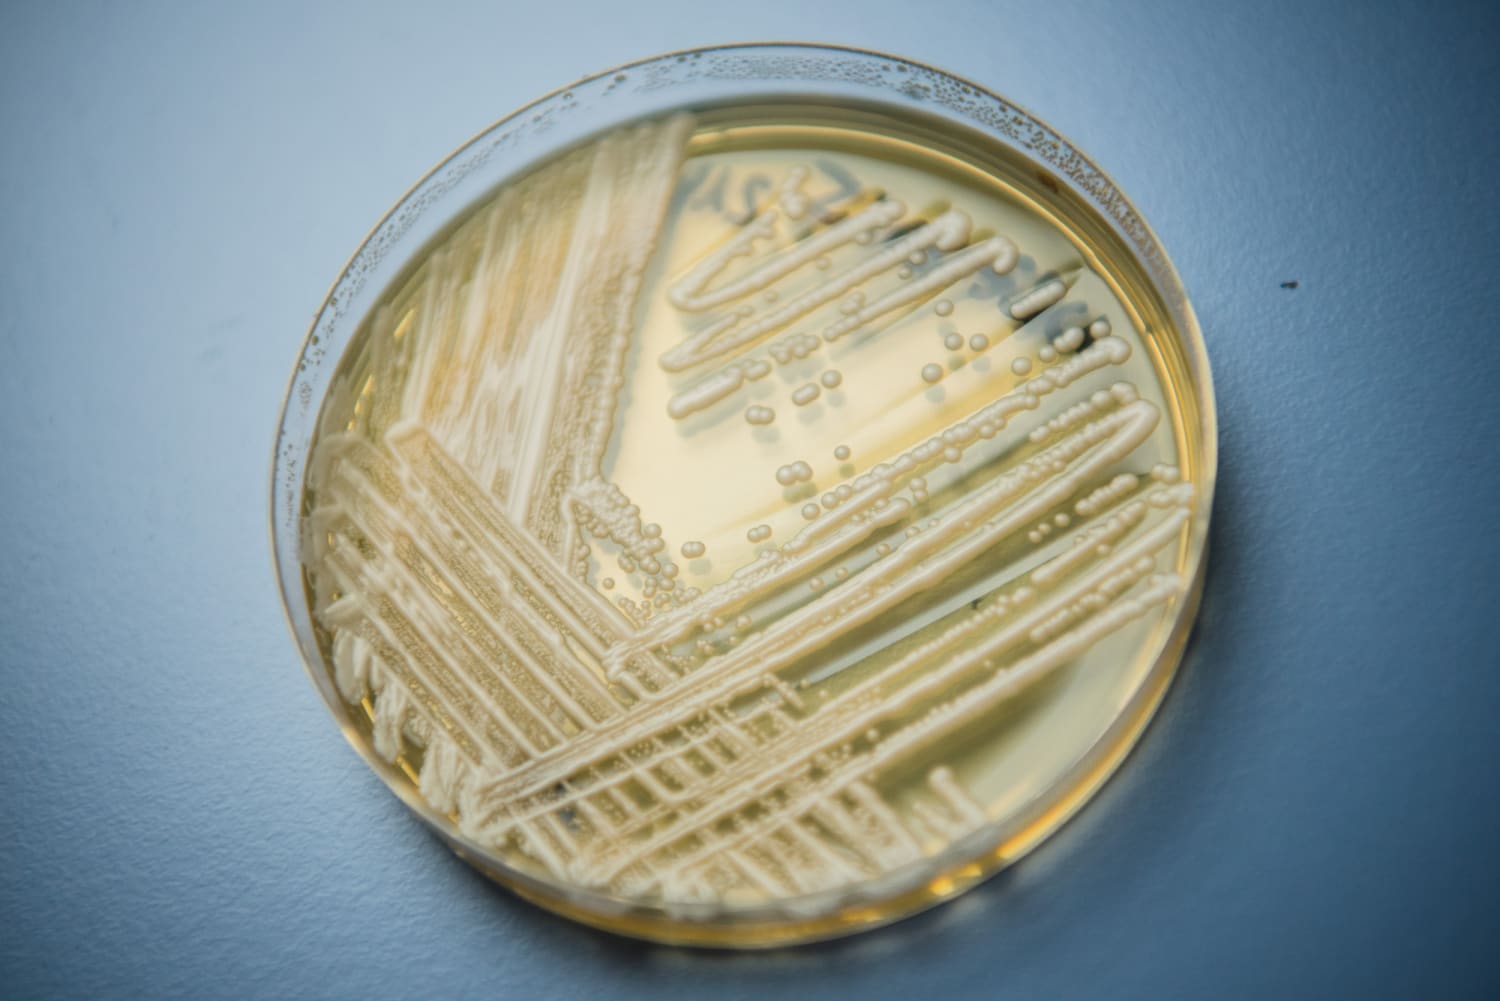 Washington is facing its first outbreak of the fungal infection Candida auris